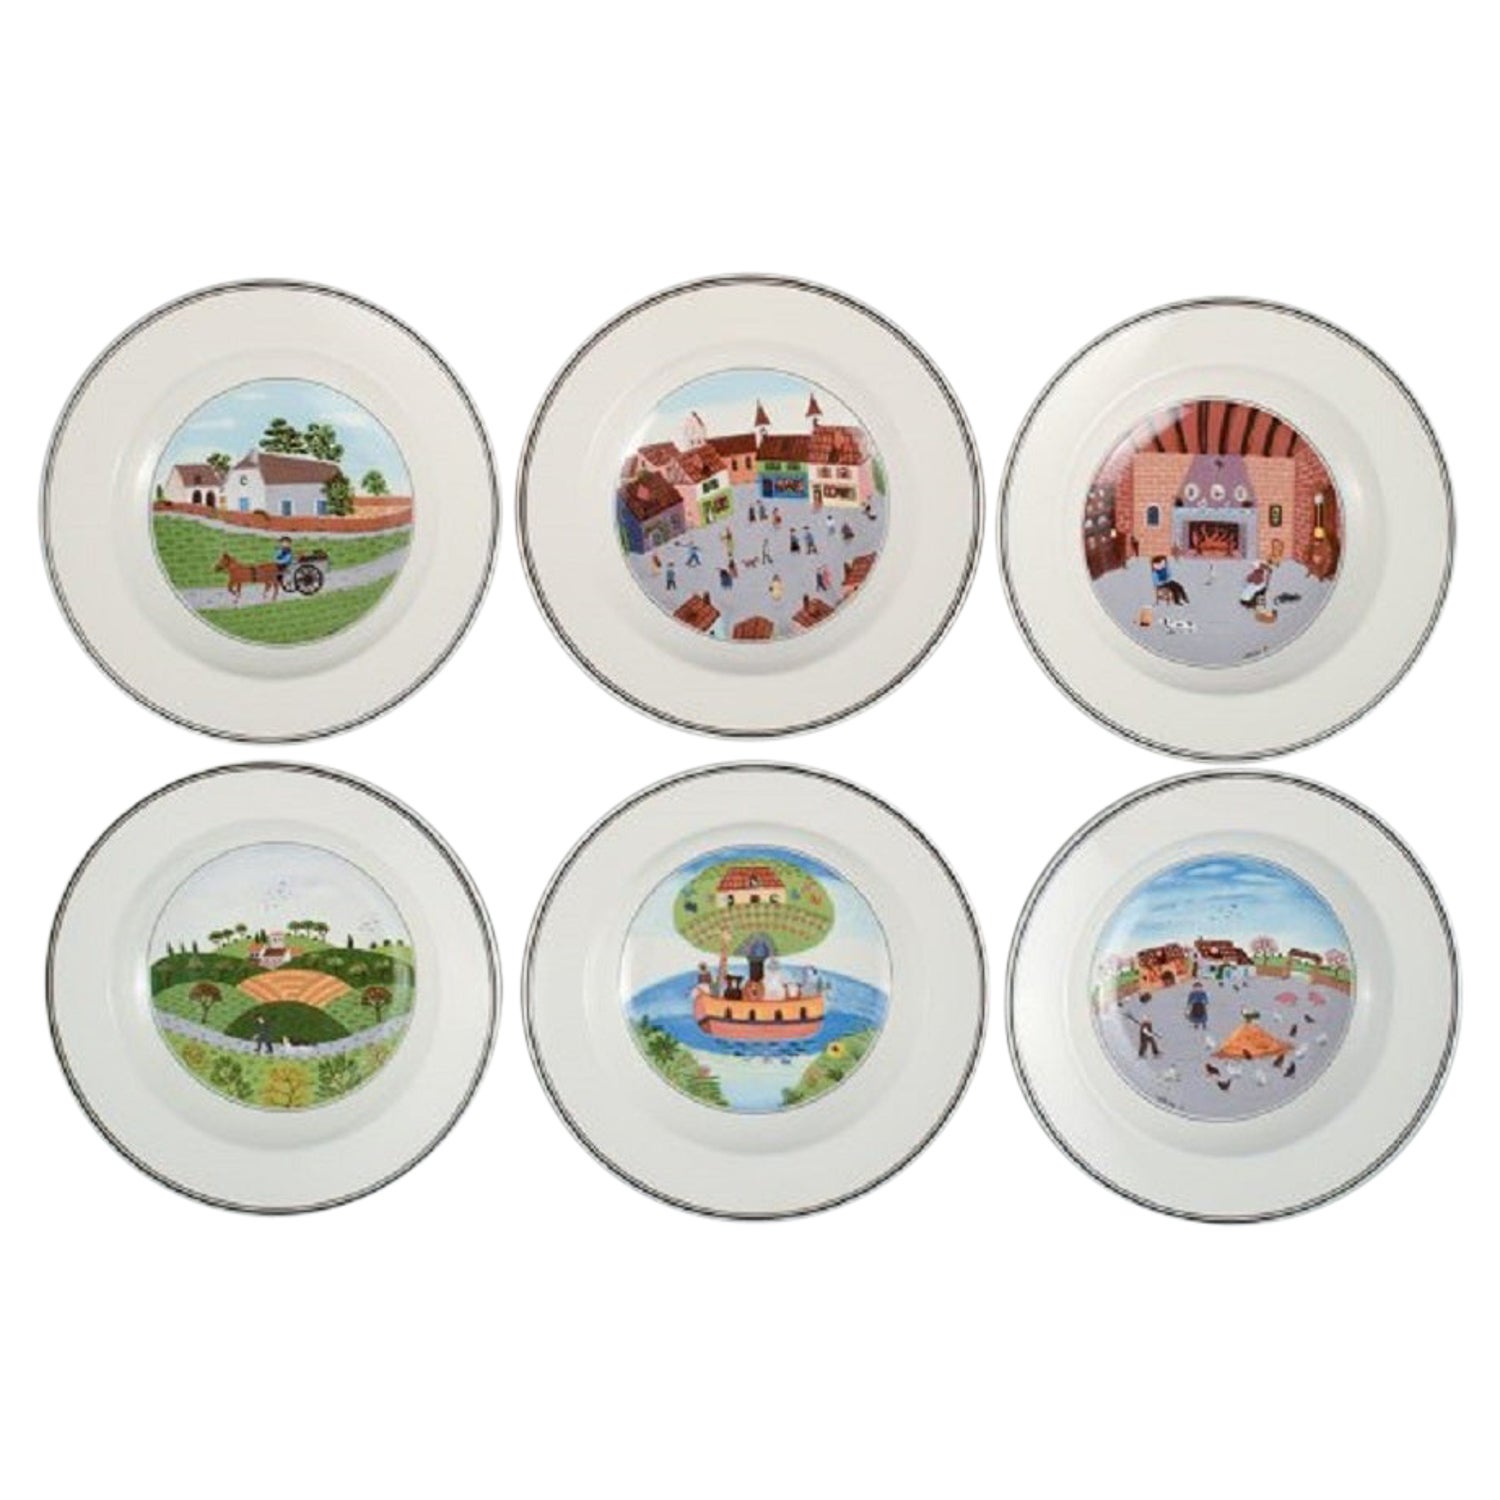 Villeroy and Boch Naif Dinner Service in Porcelain, a Set of 6 Deep Plates  For Sale at 1stDibs | villeroy & boch dinnerware, villeroy and boch  dinnerware, villeroy and boch flatware